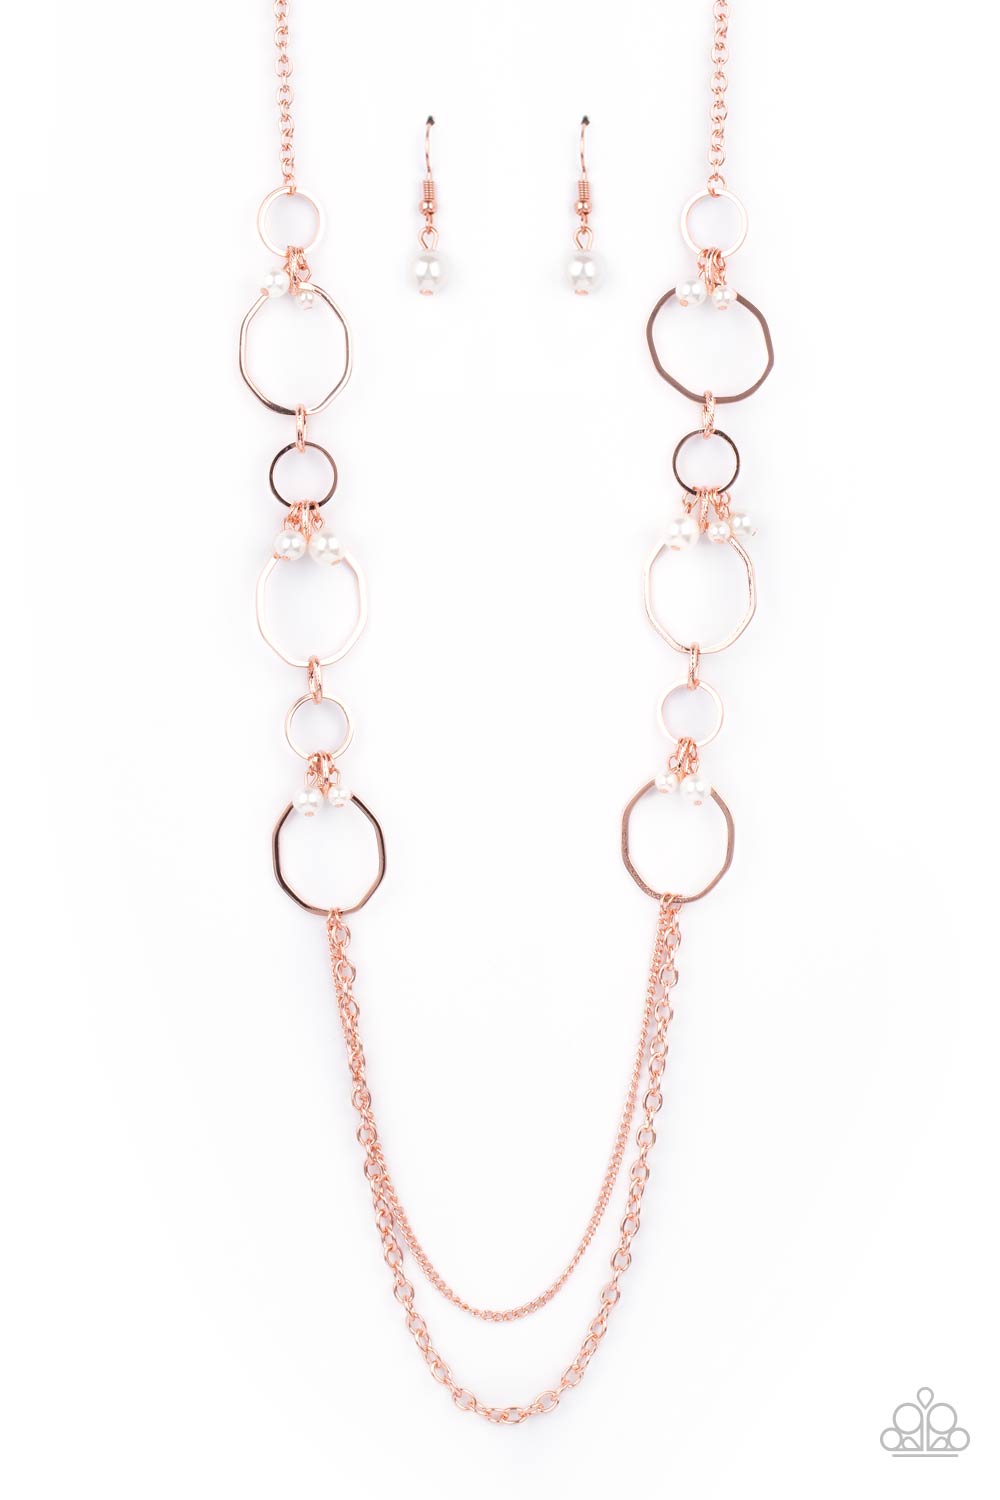 Paparazzi Accessories Ante UPSCALE - Copper Necklace & Earrings 